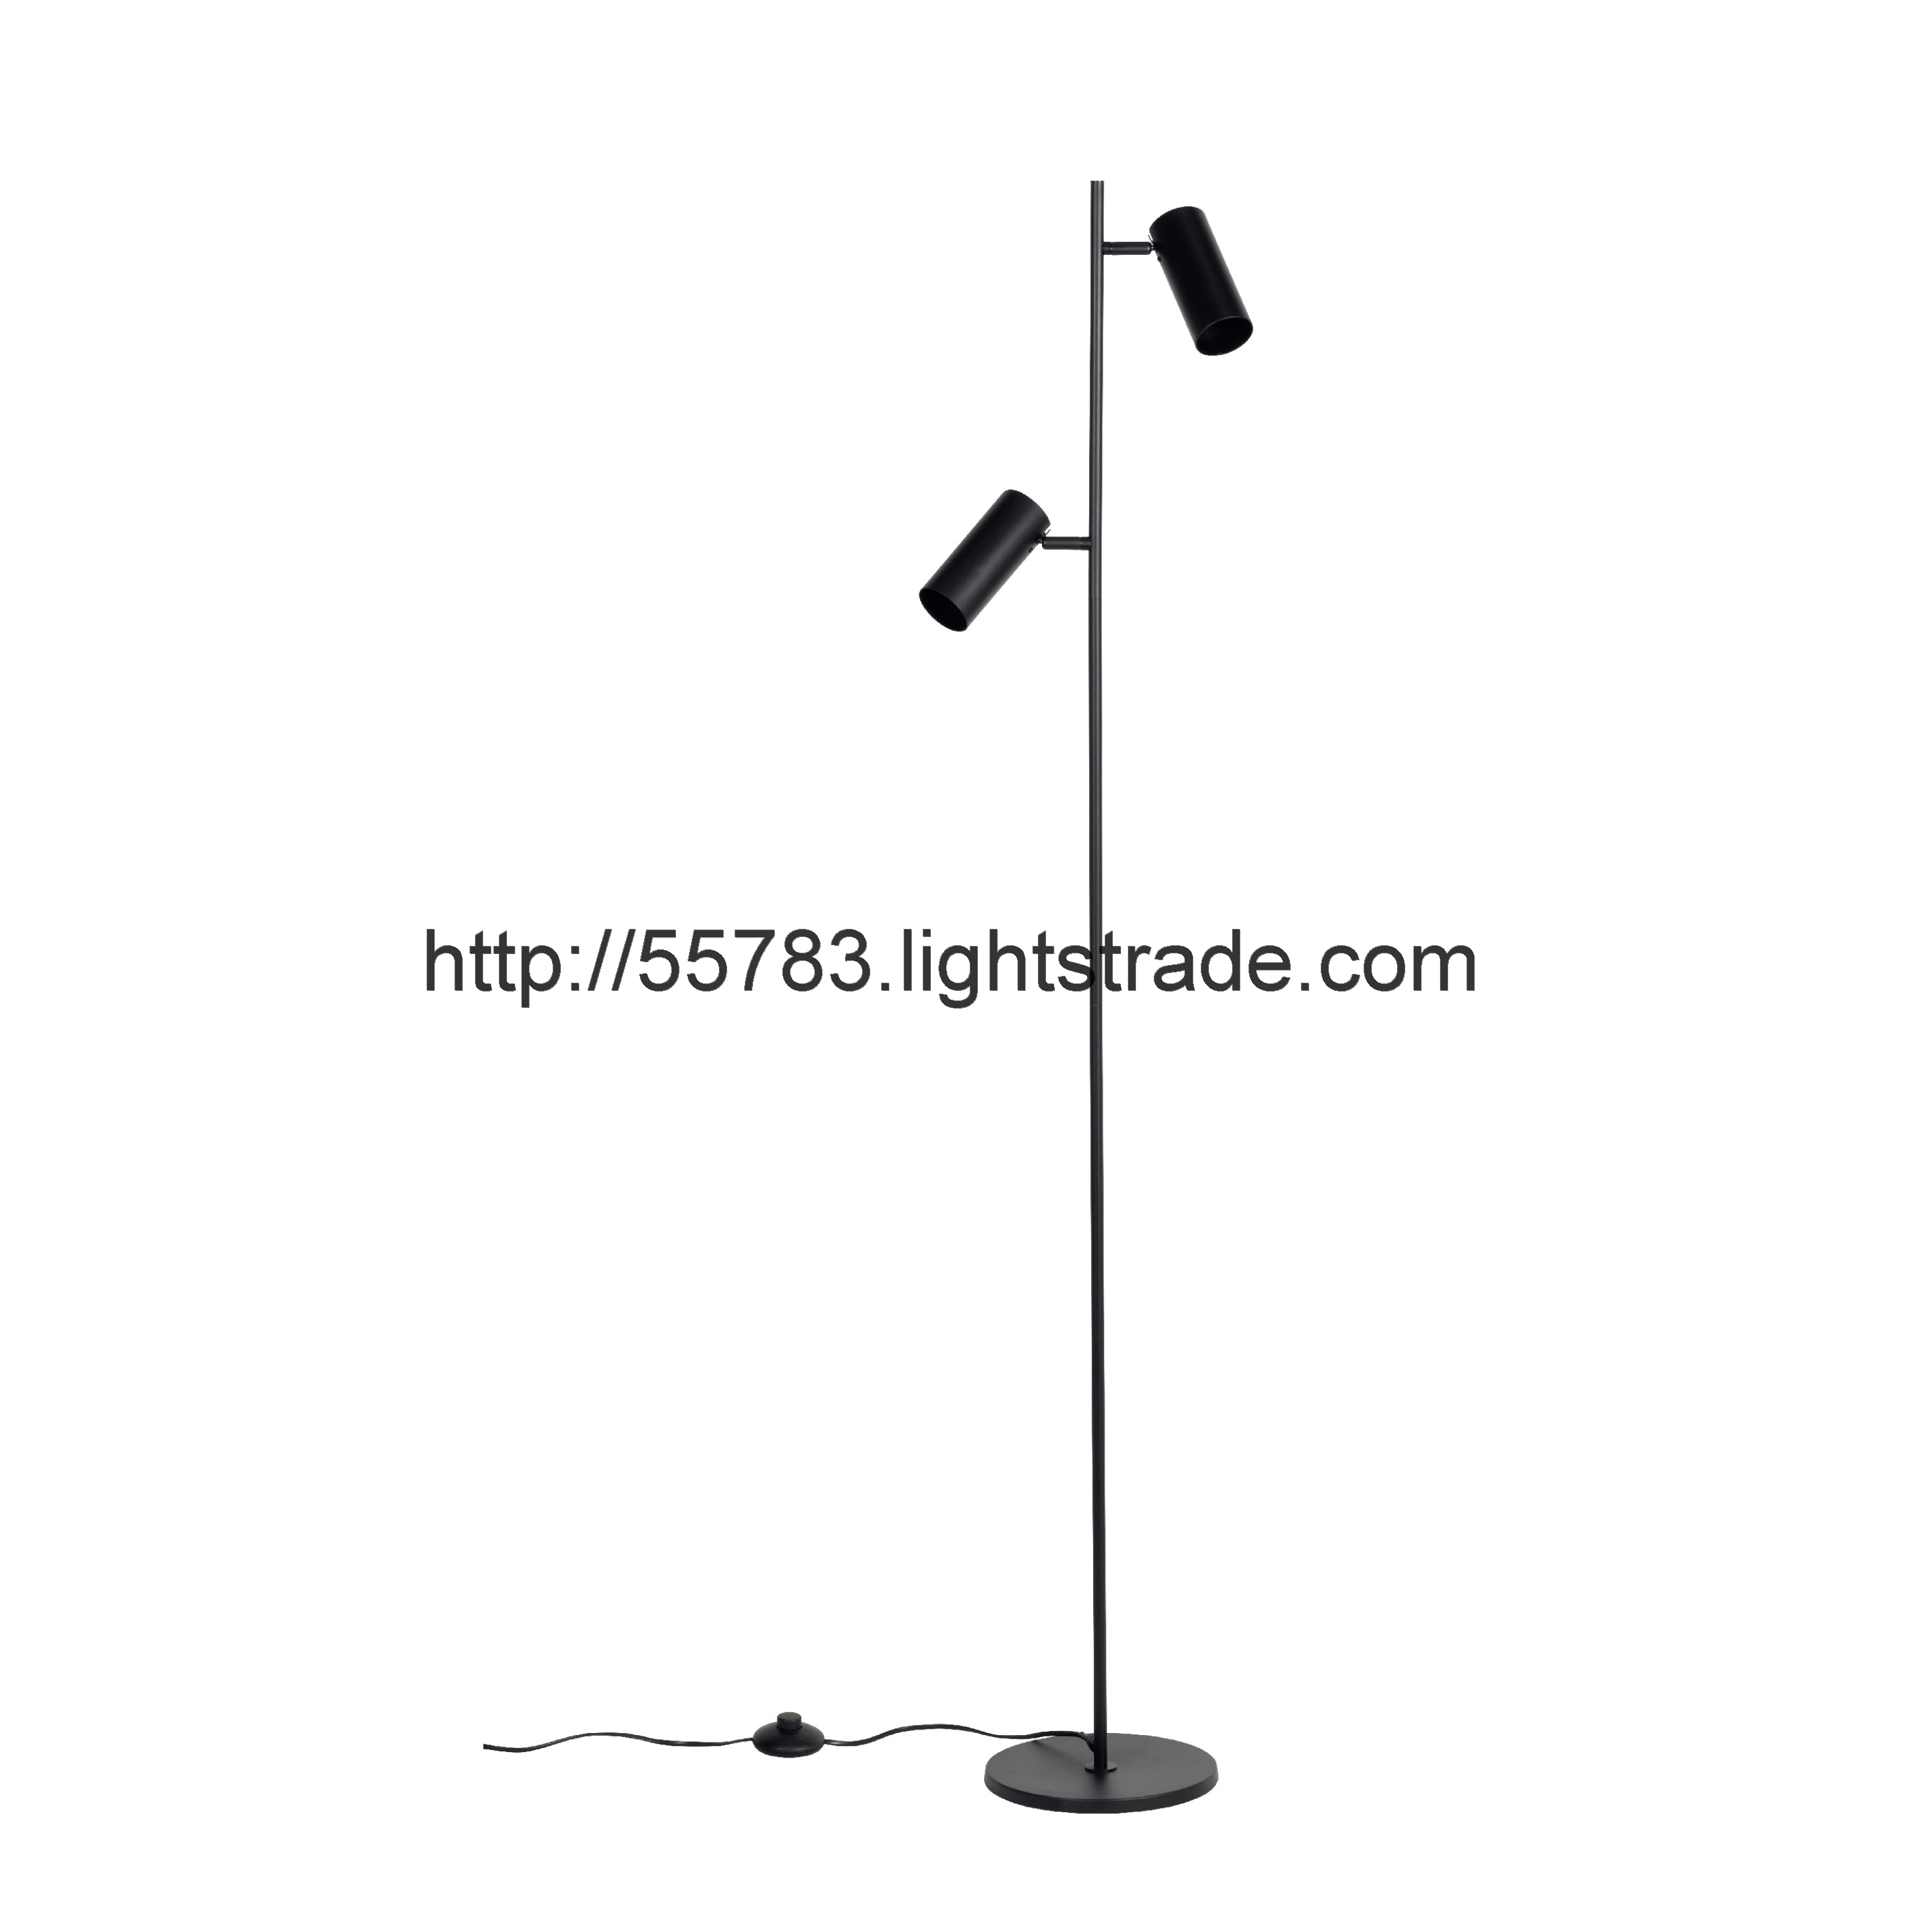 FLOOR LAMP WITH FOOTSWITCH ANGLE ADJUSTABLE HF190326-01